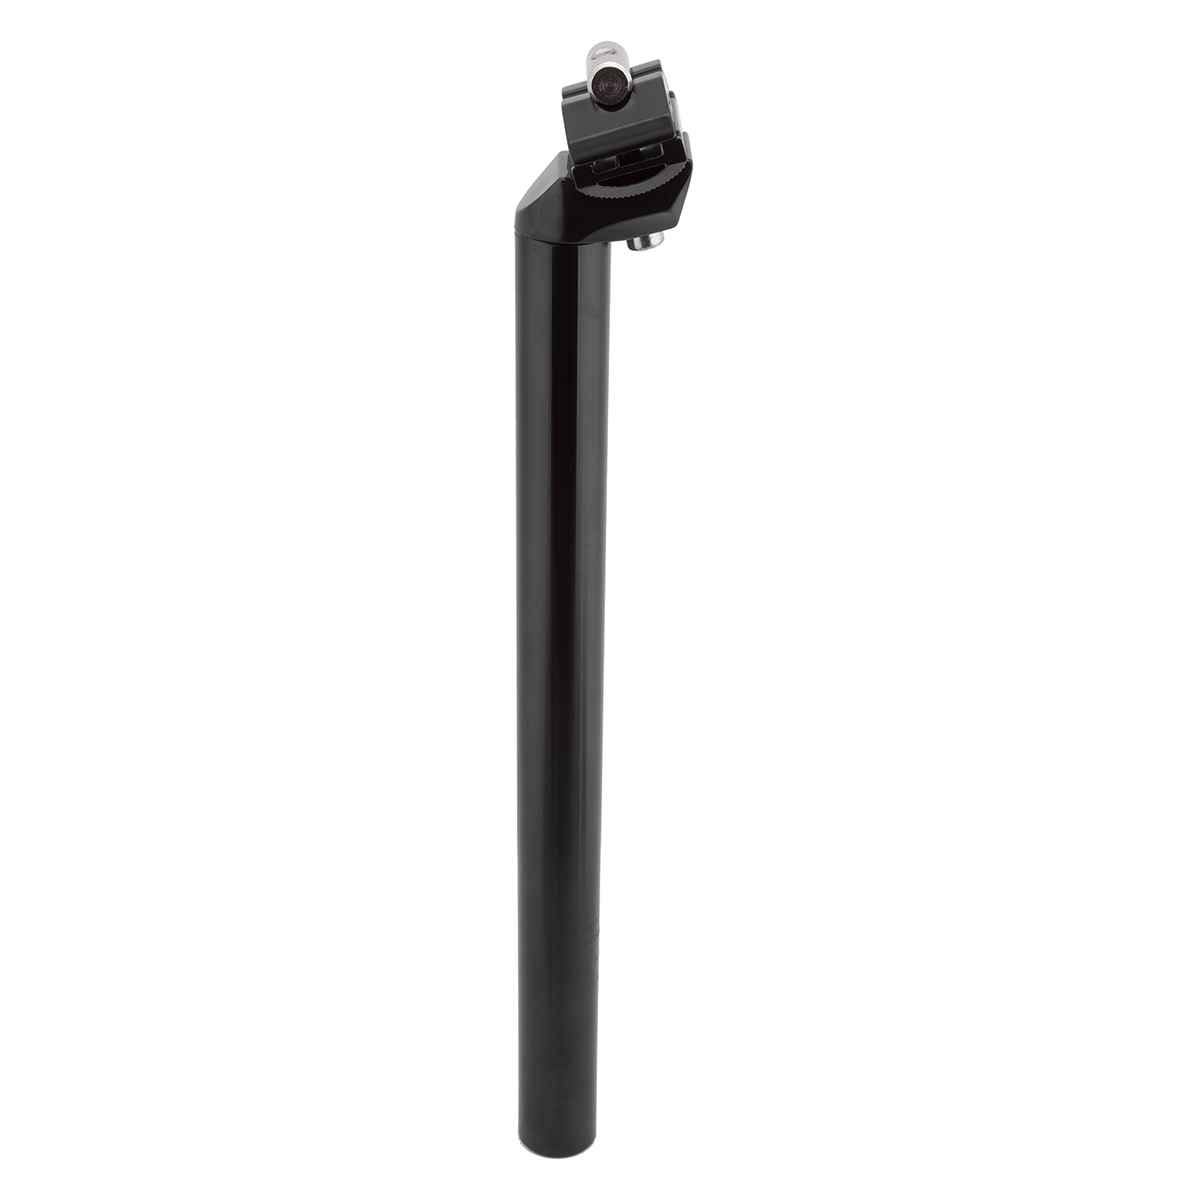 Sunlite Classic Alloy Seat Post with Clamp - Black, 27.4mm x 350mm